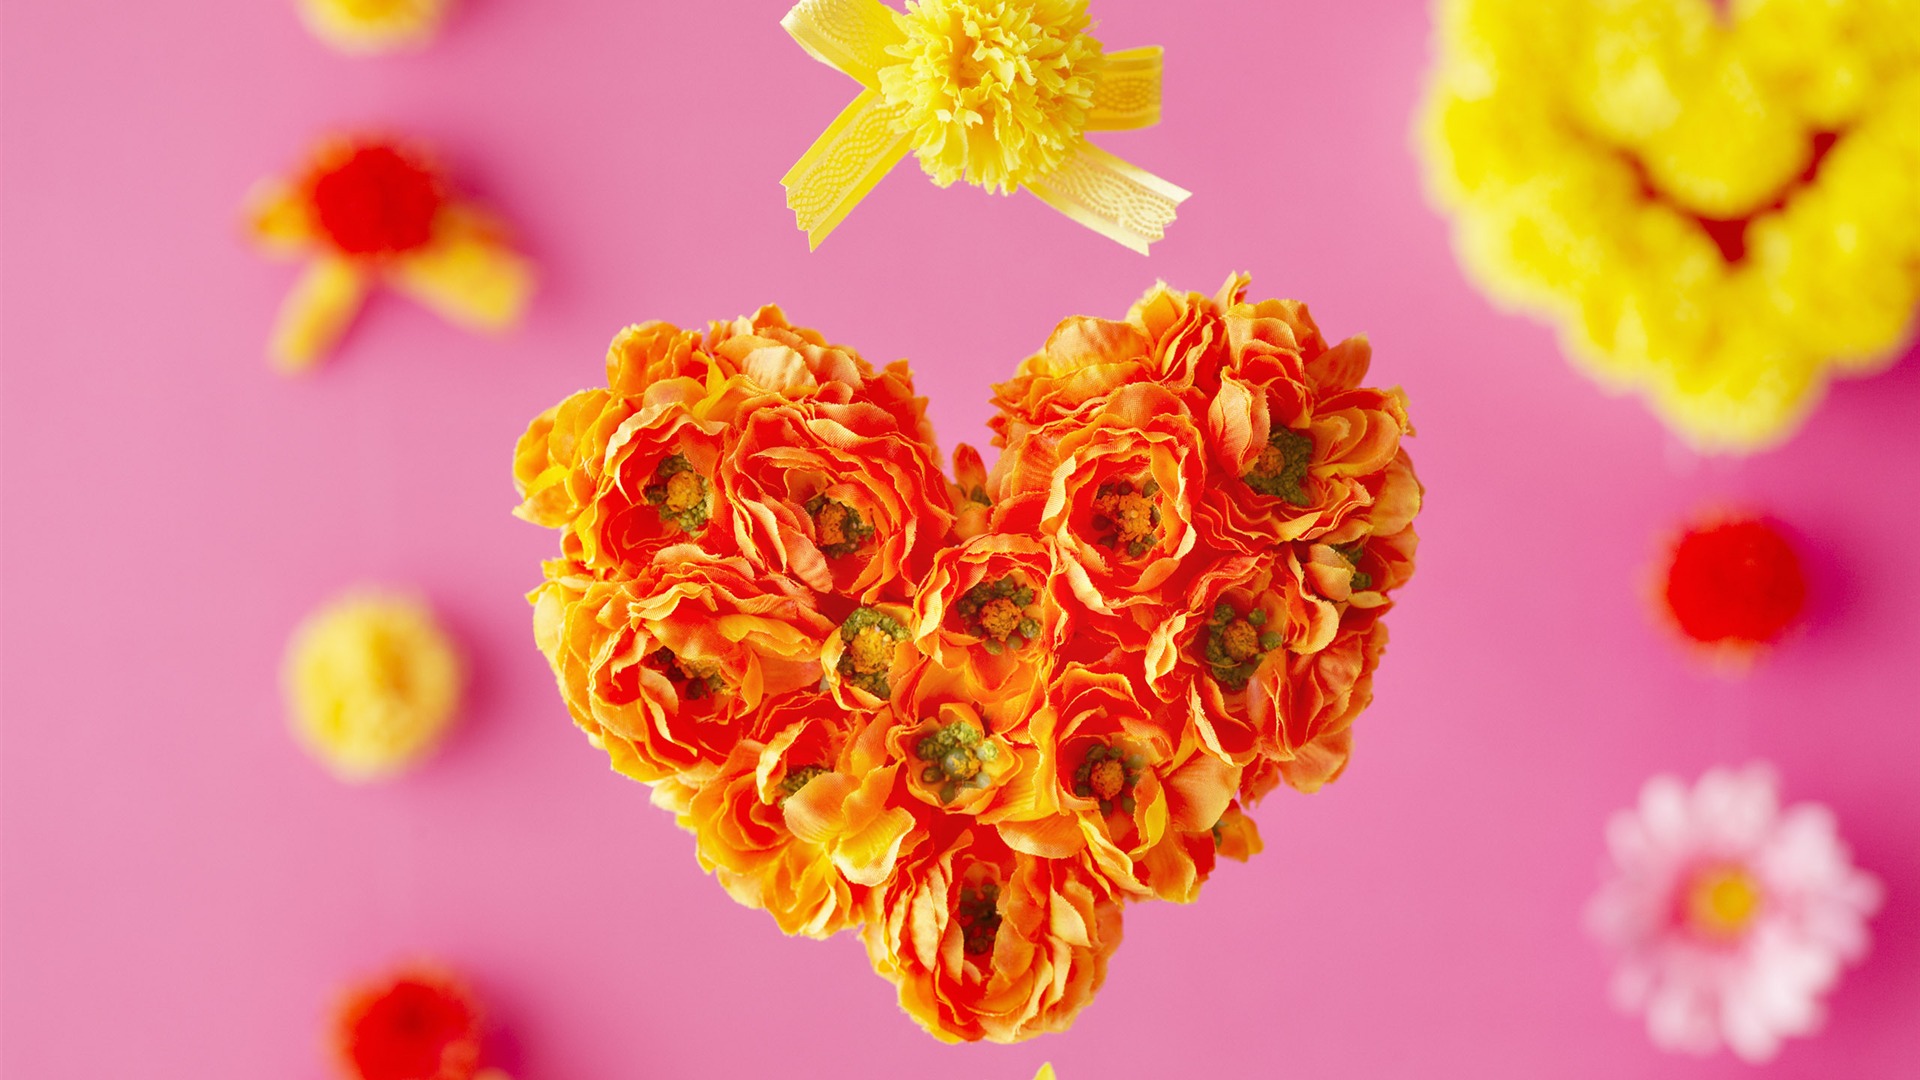 Flowers Gifts HD Wallpapers (2) #4 - 1920x1080